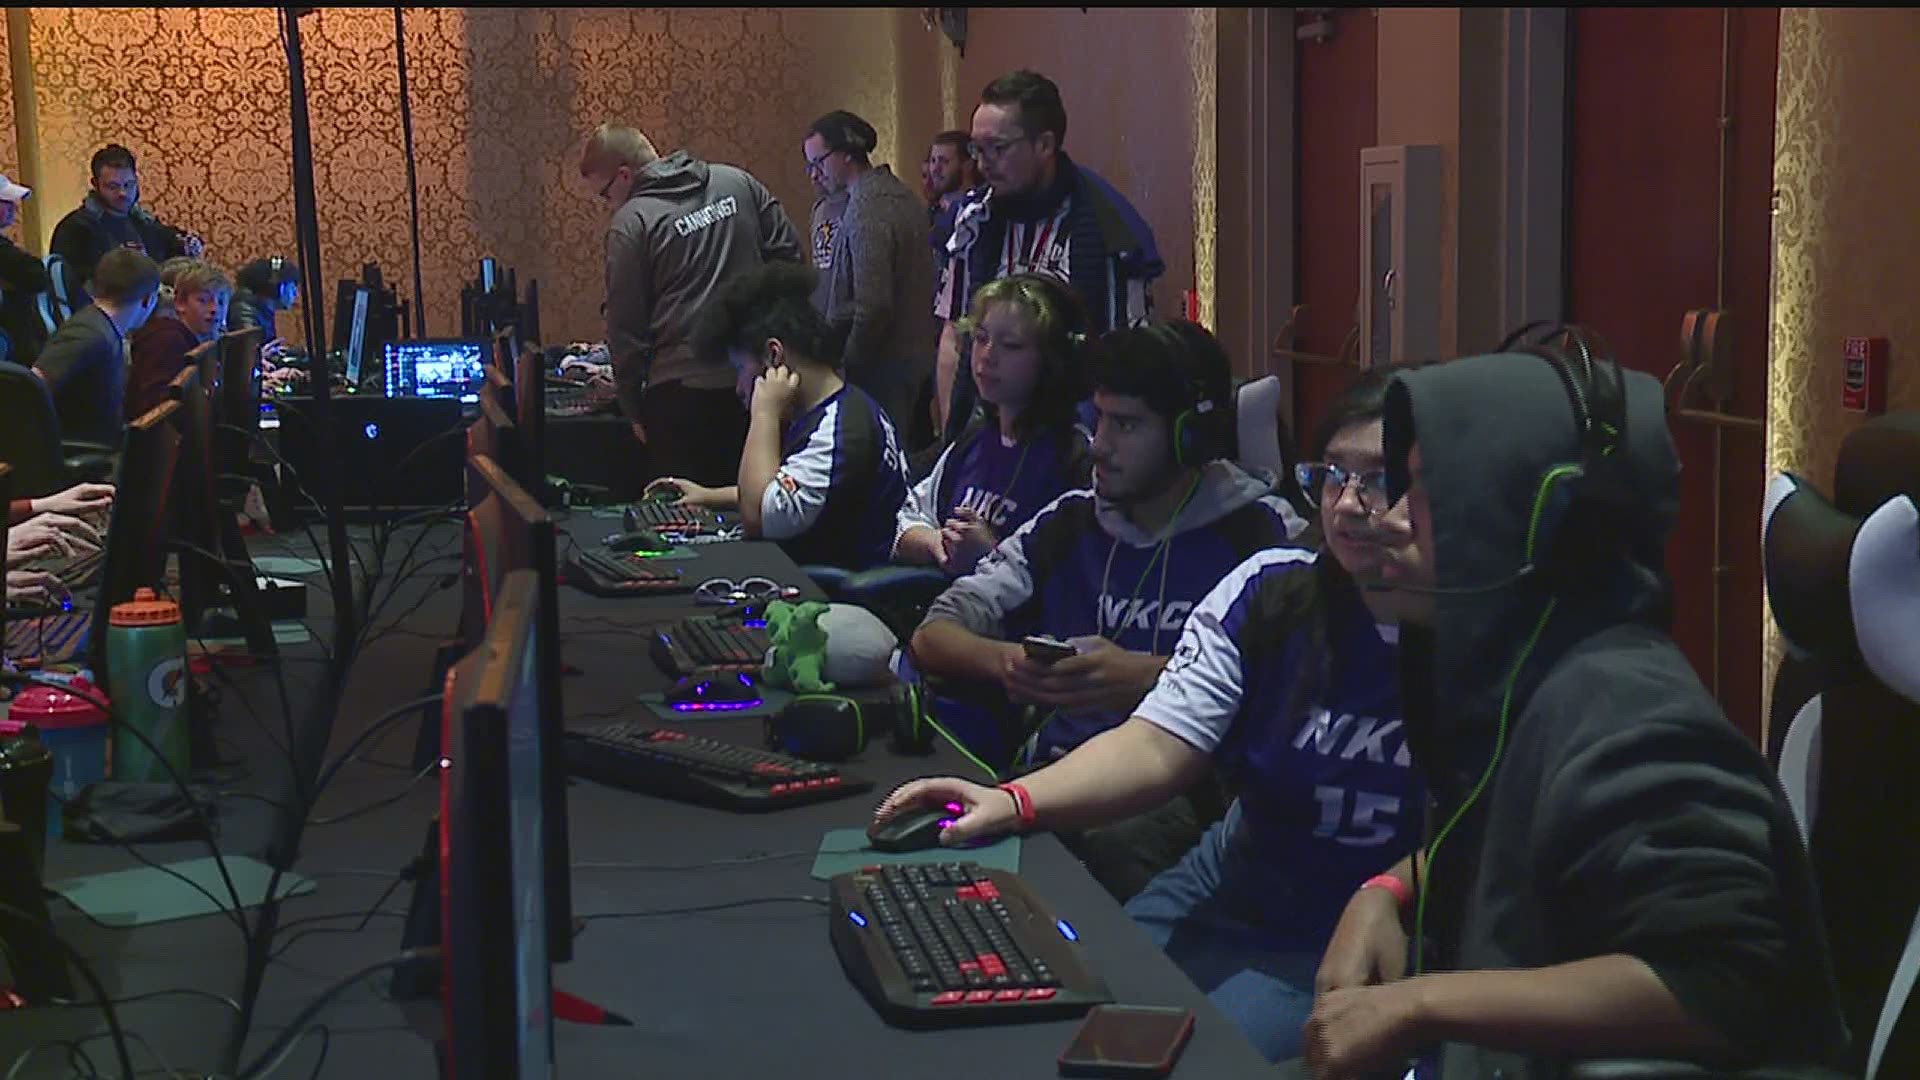 Students from 10 different schools compete in the February E-sports Extravaganza Tournament in Lancaster